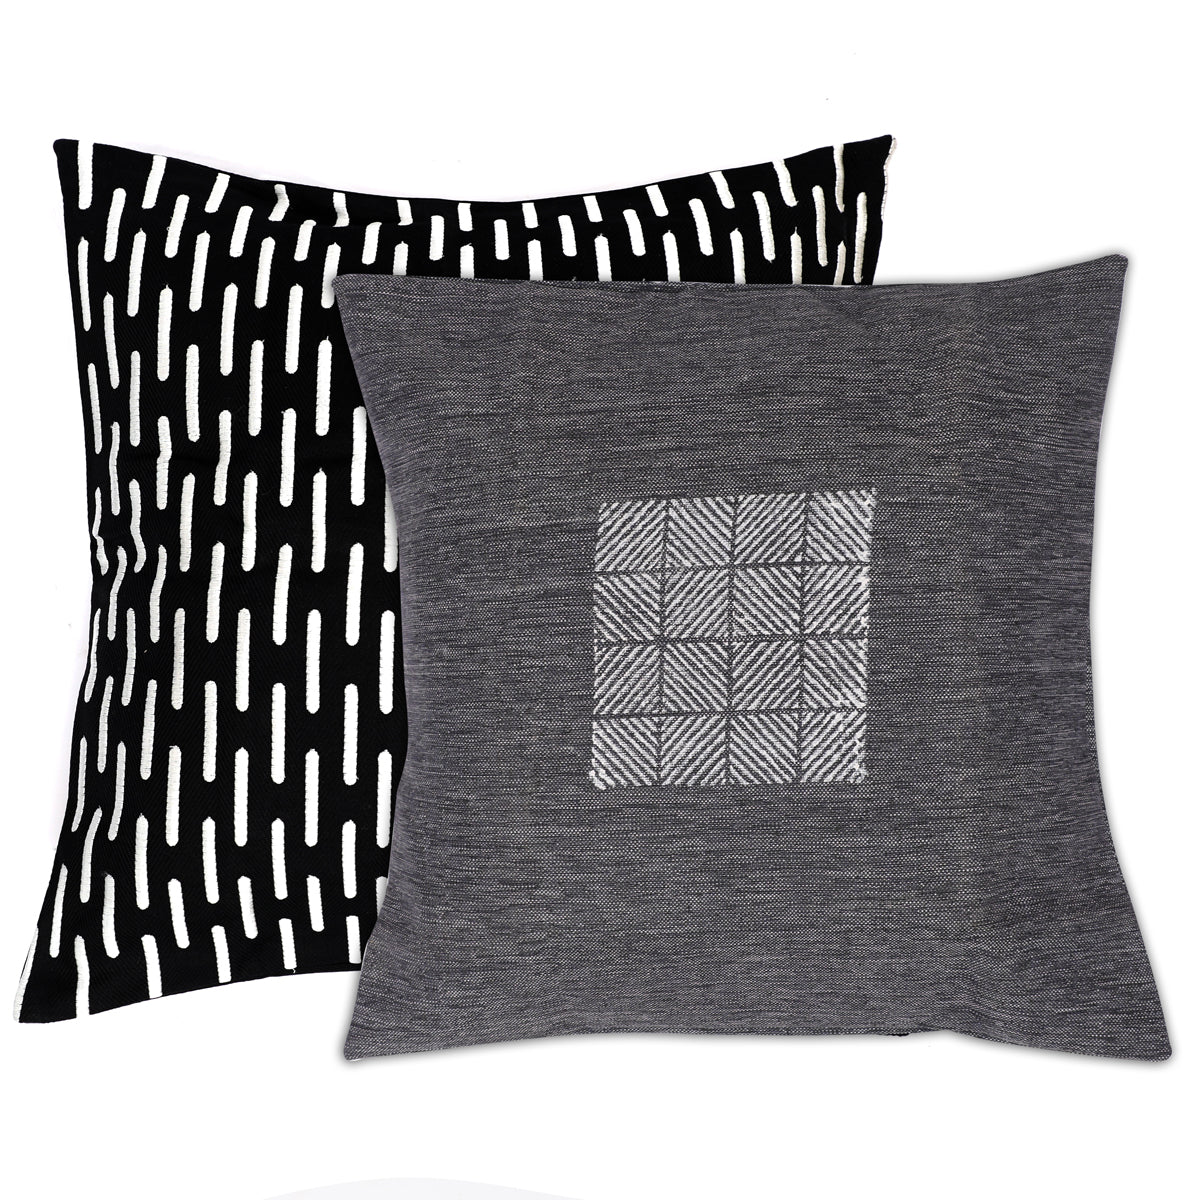 BLURRED LINES CUSHION COVER 2Pc 18x18